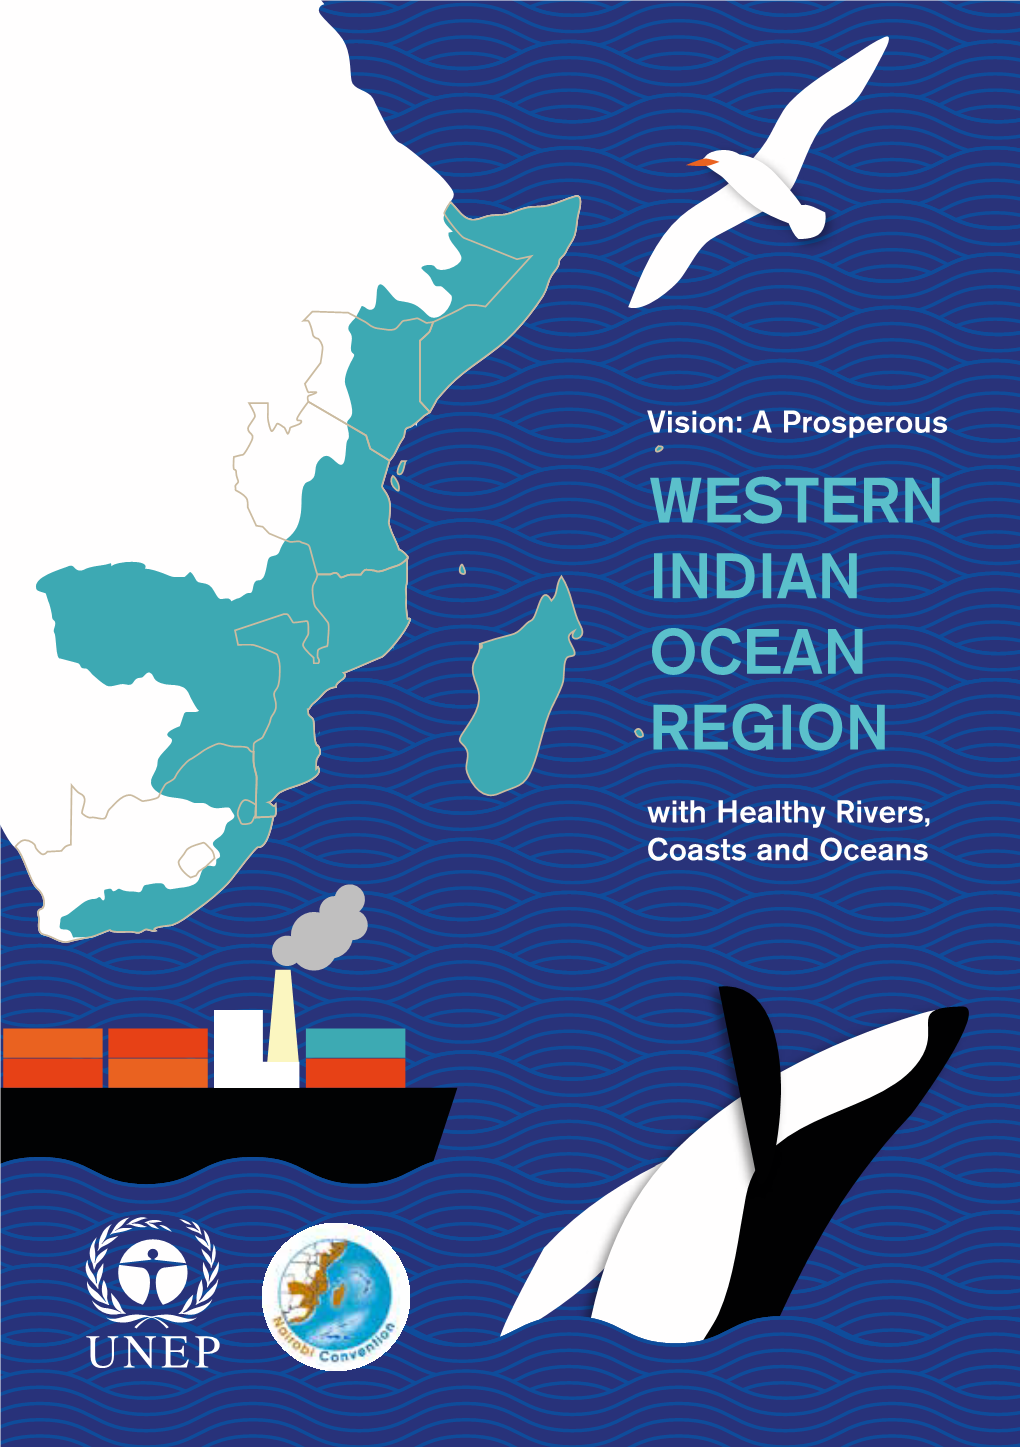 The Nairobi Convention for the Development, Protection and Management of the Marine and Coastal Environment of the Western Indian Ocean